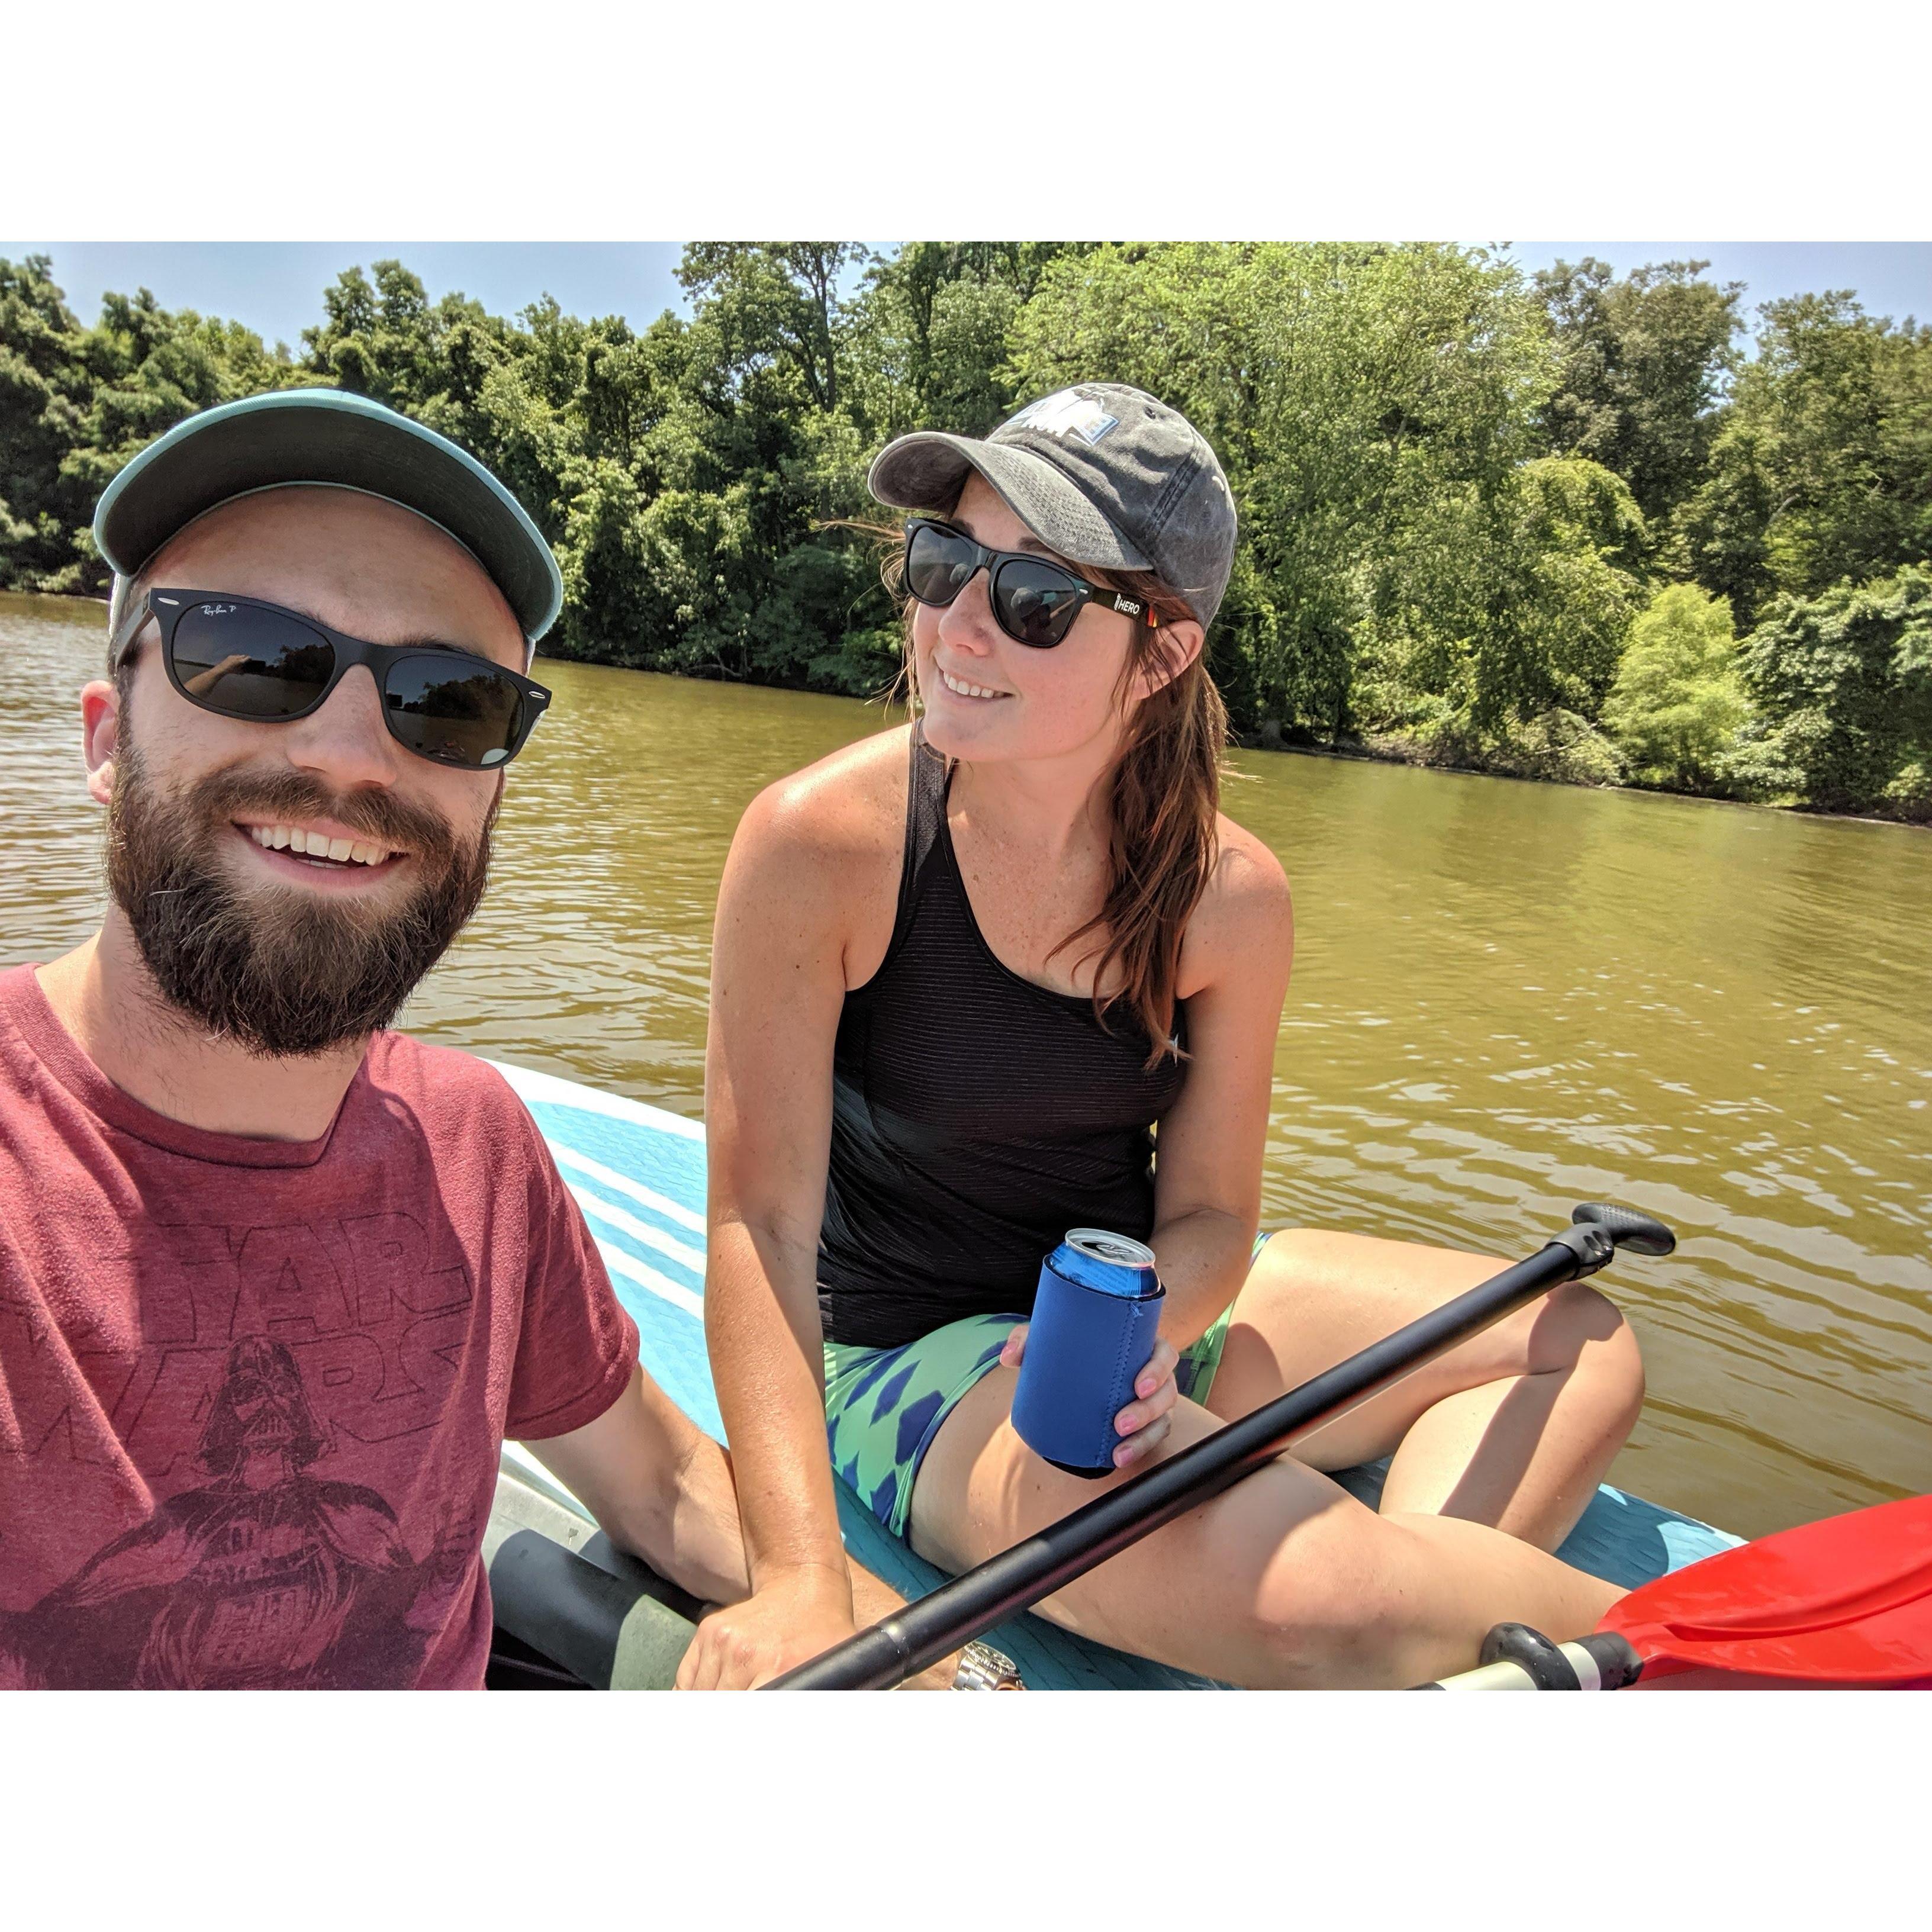 Two of our favorite summer activities - kayaking, and paddleboarding.